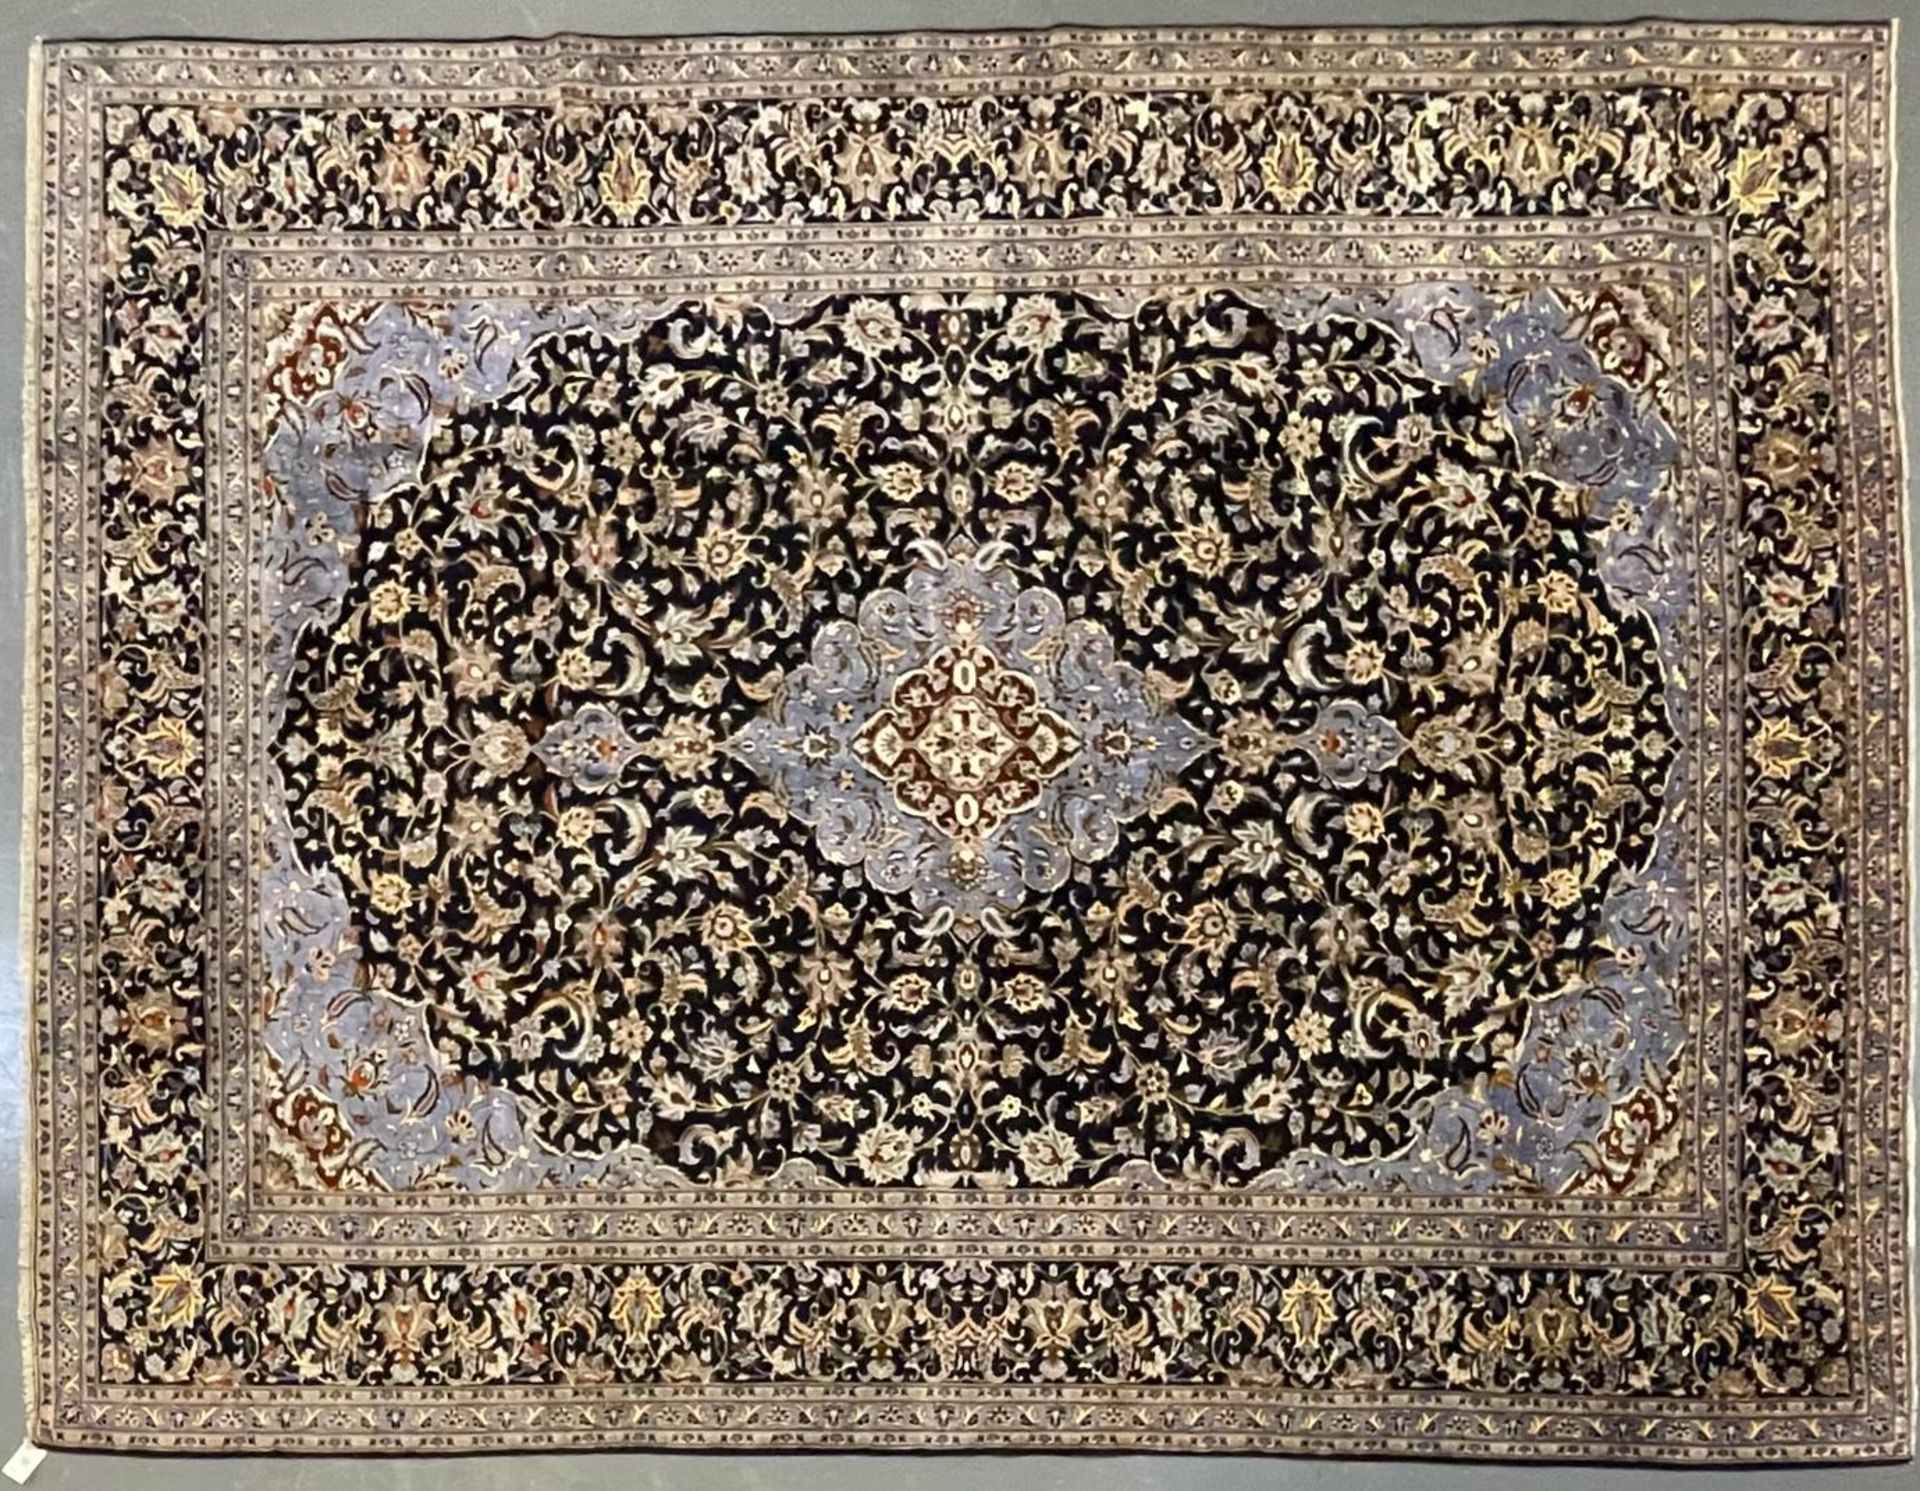 LARGE EARLY 20TH CENTURY CENTRAL PERSIAN KASHAN CARPET RUG